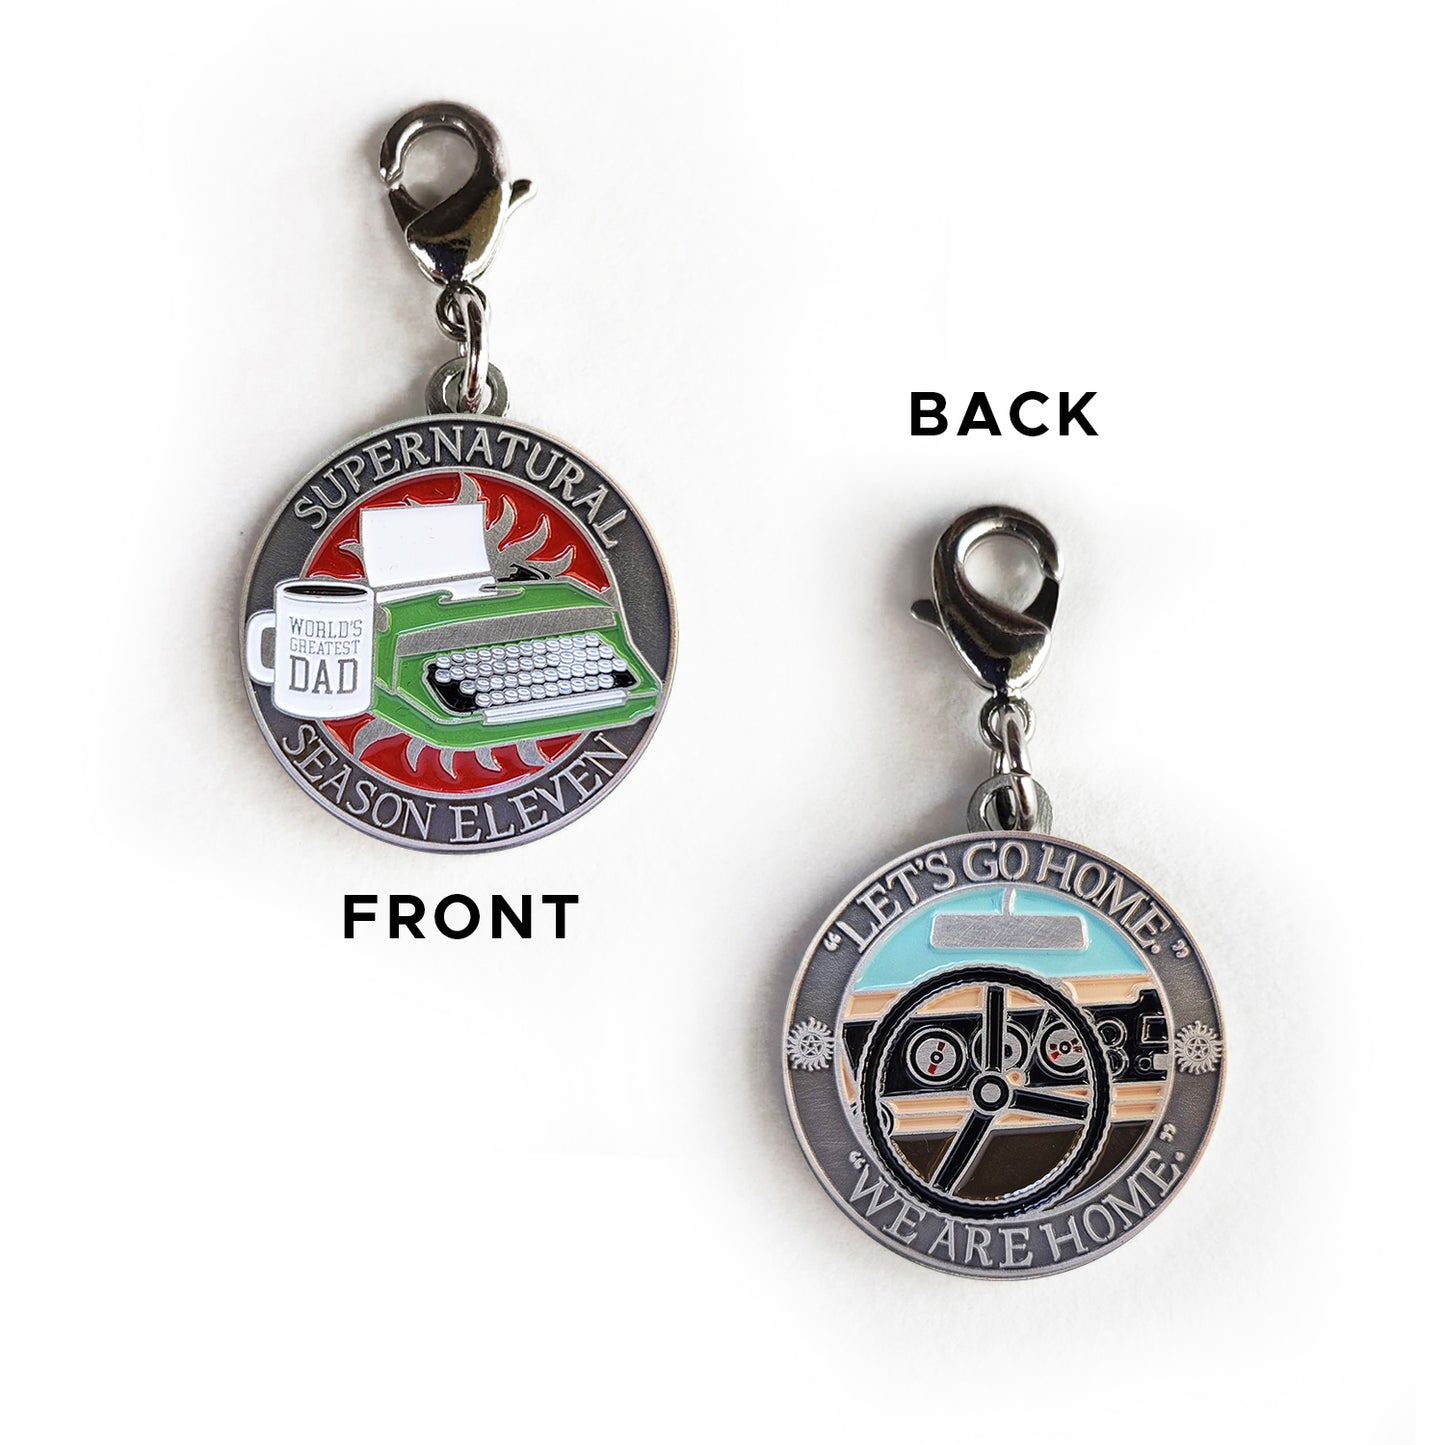 Front and back views of a brass charm. On the front is a green typewriter on a red background. Next to it is a white mug with "World's Greatest Dad" printed on it. Around the edge of the coin, raised text says "Supernatural Season Eleven." The back of the coin depicts a black steering wheel in front of a car dashboard. Around the edge is raised text saying "Let's go home... we are home."